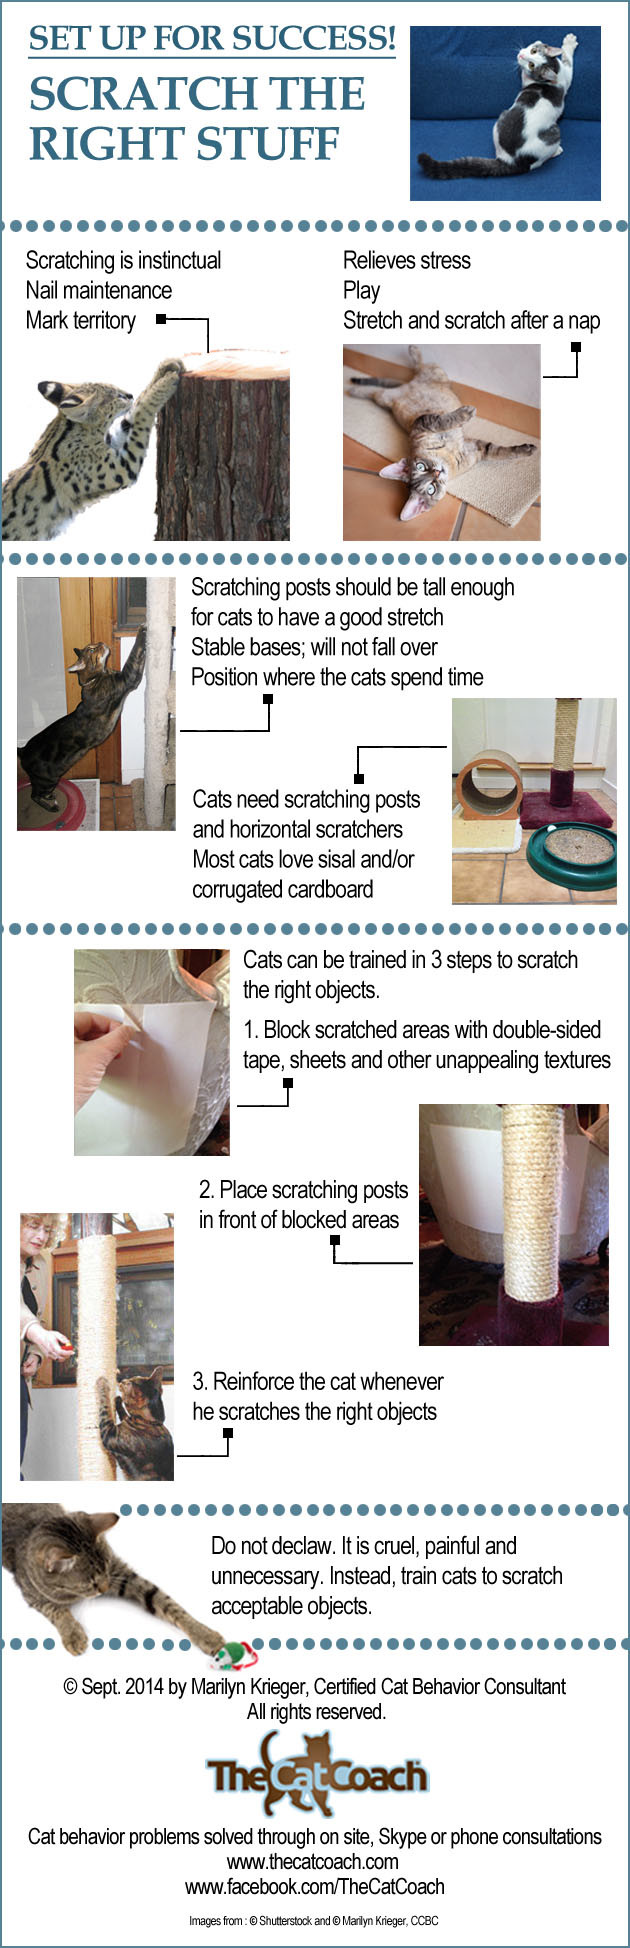 Cats can be trained to scratch the right furniture by Marilyn Krieger, CCBC